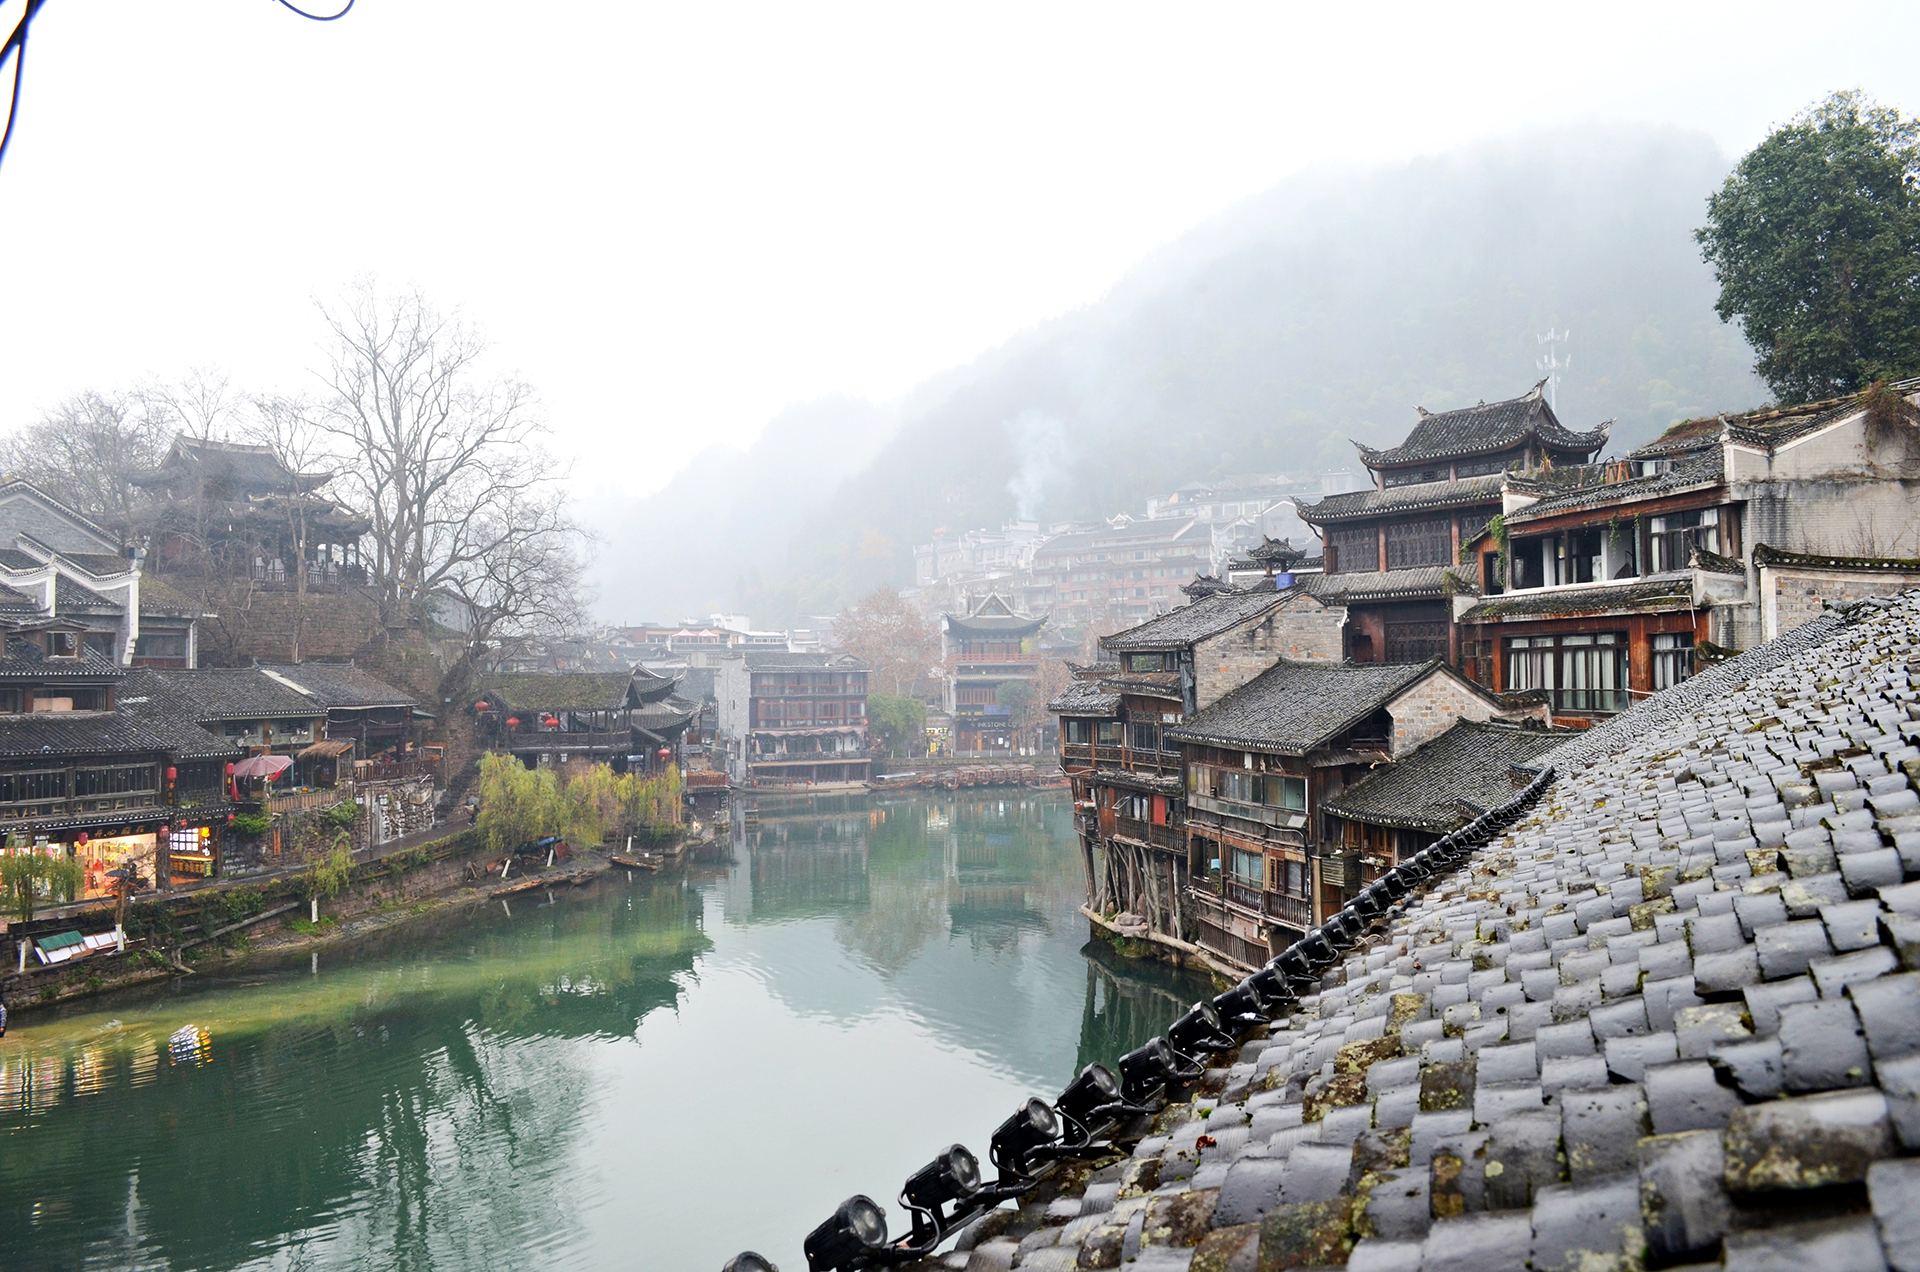 View of a town in China